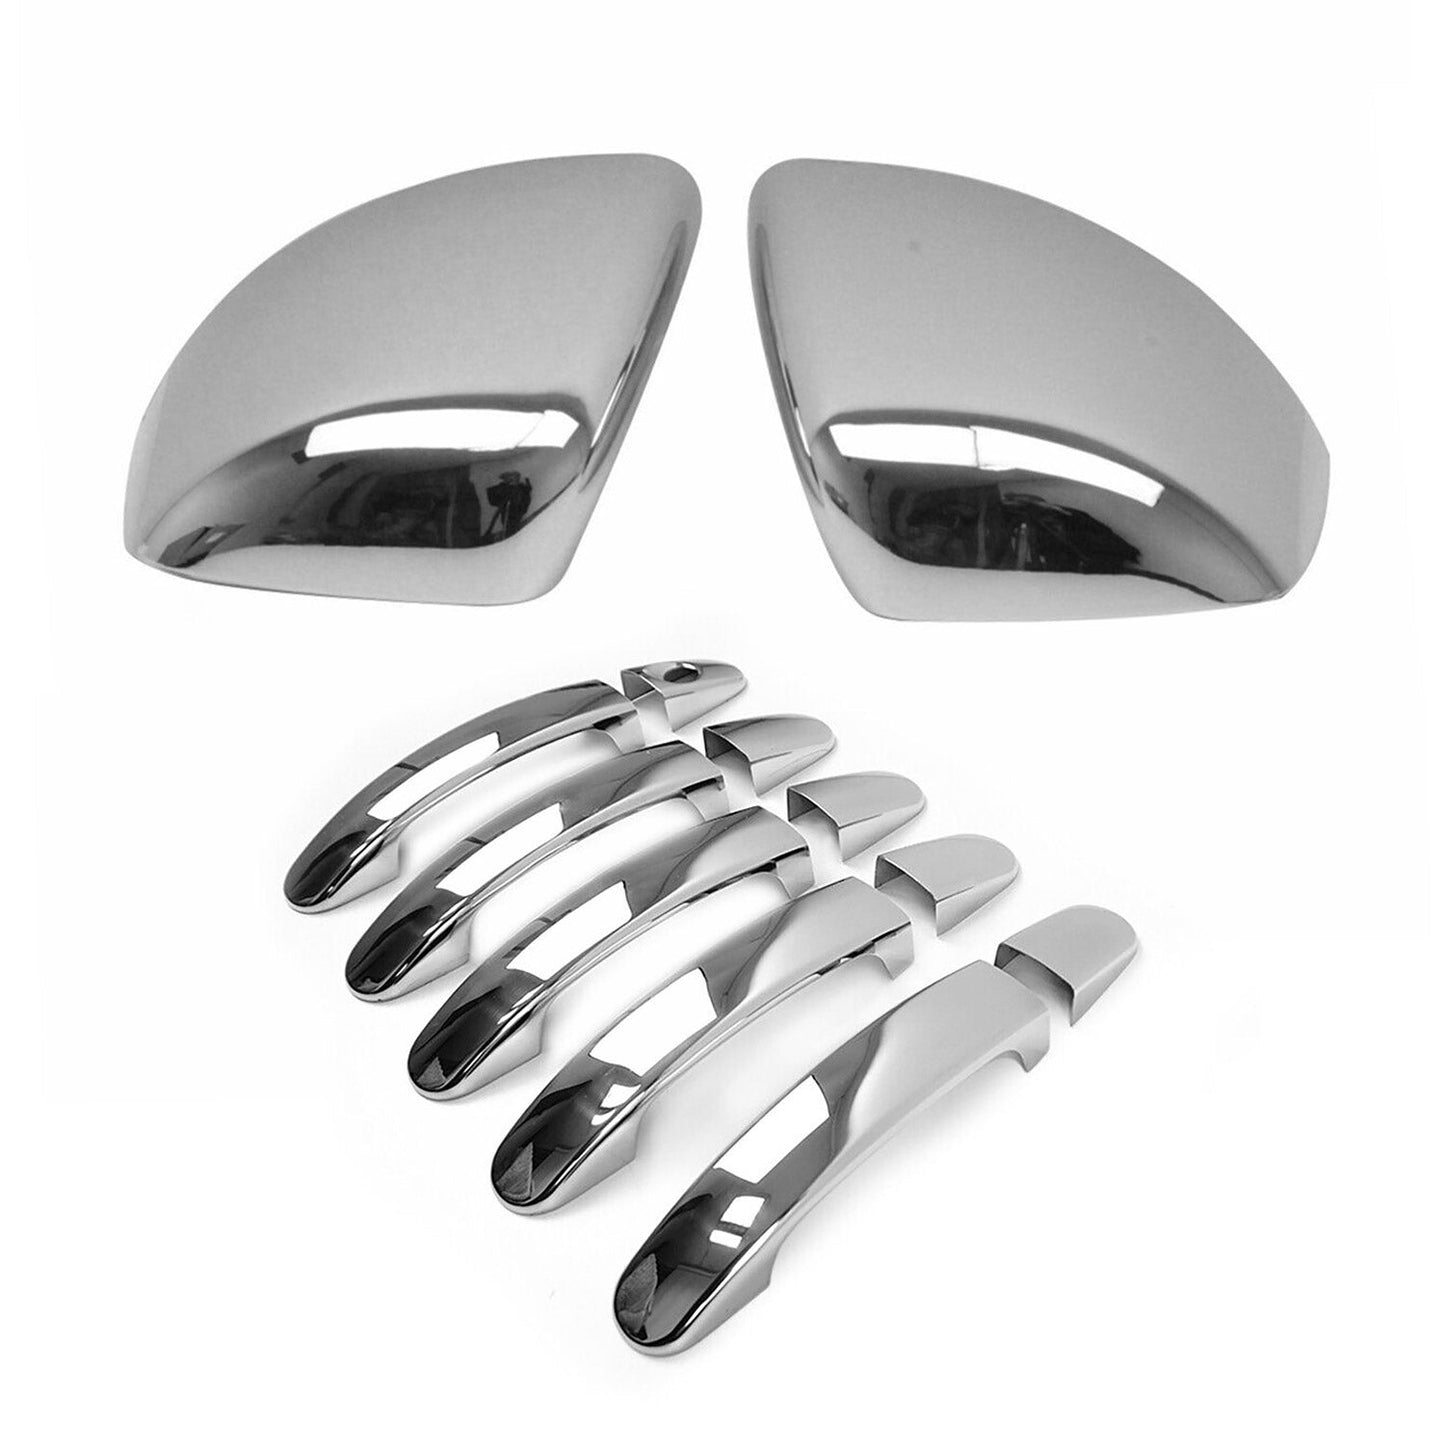 OMAC Mirror Cover Caps & Door Handle Chrome Set for Ford Transit Connect 2014-2019 G003343